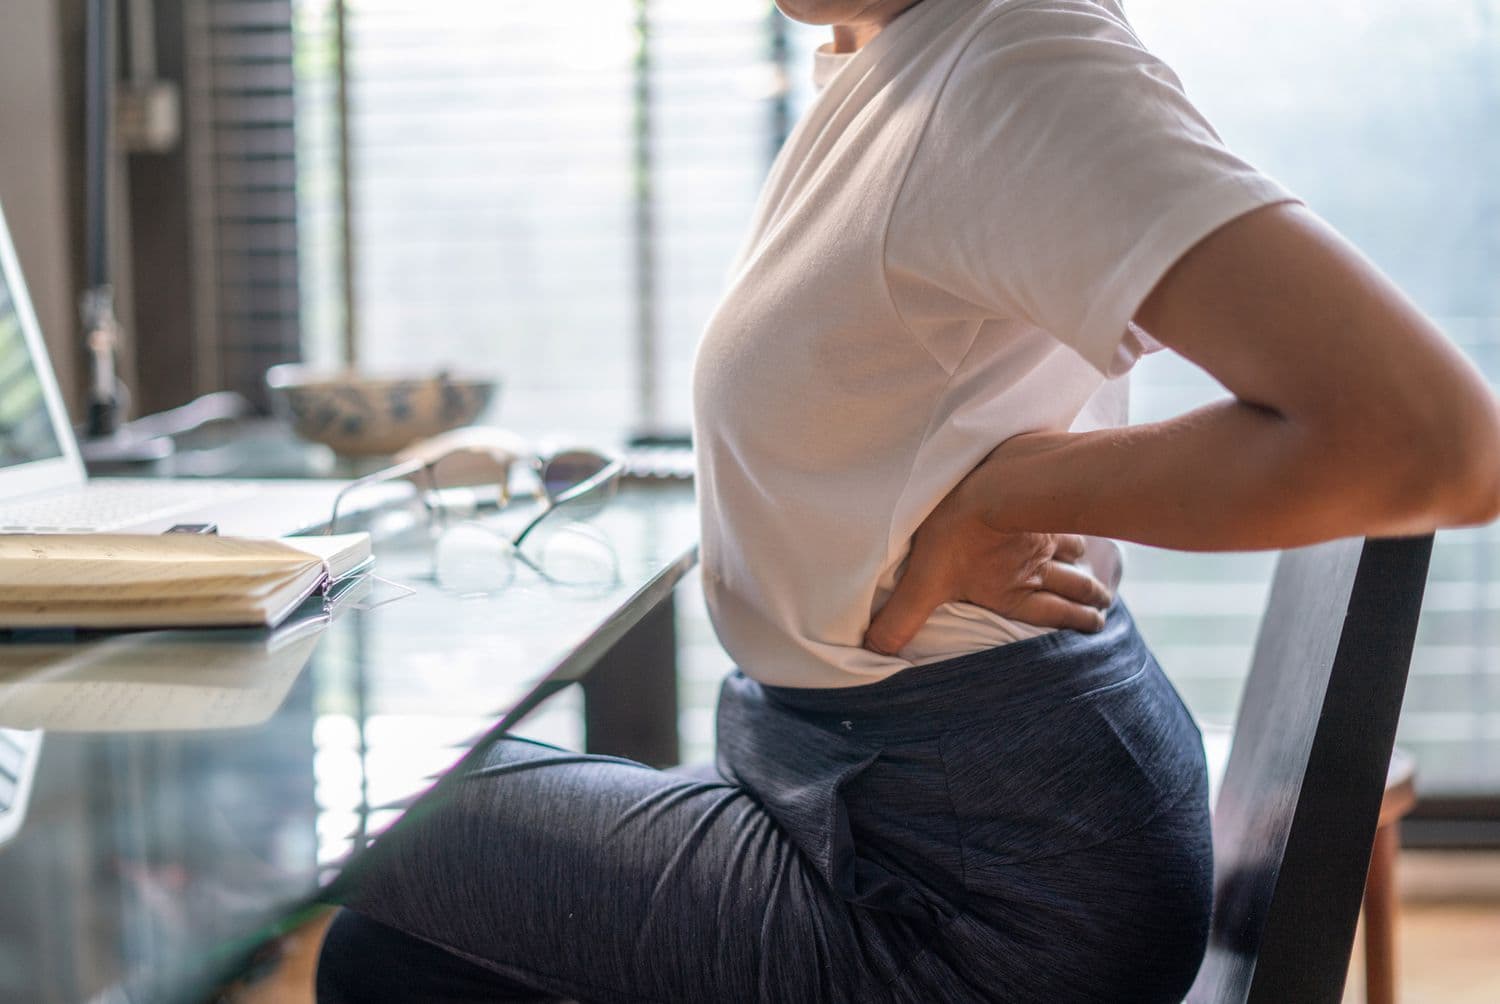 How to Fix Back Pain - A Guide to Finding Relief